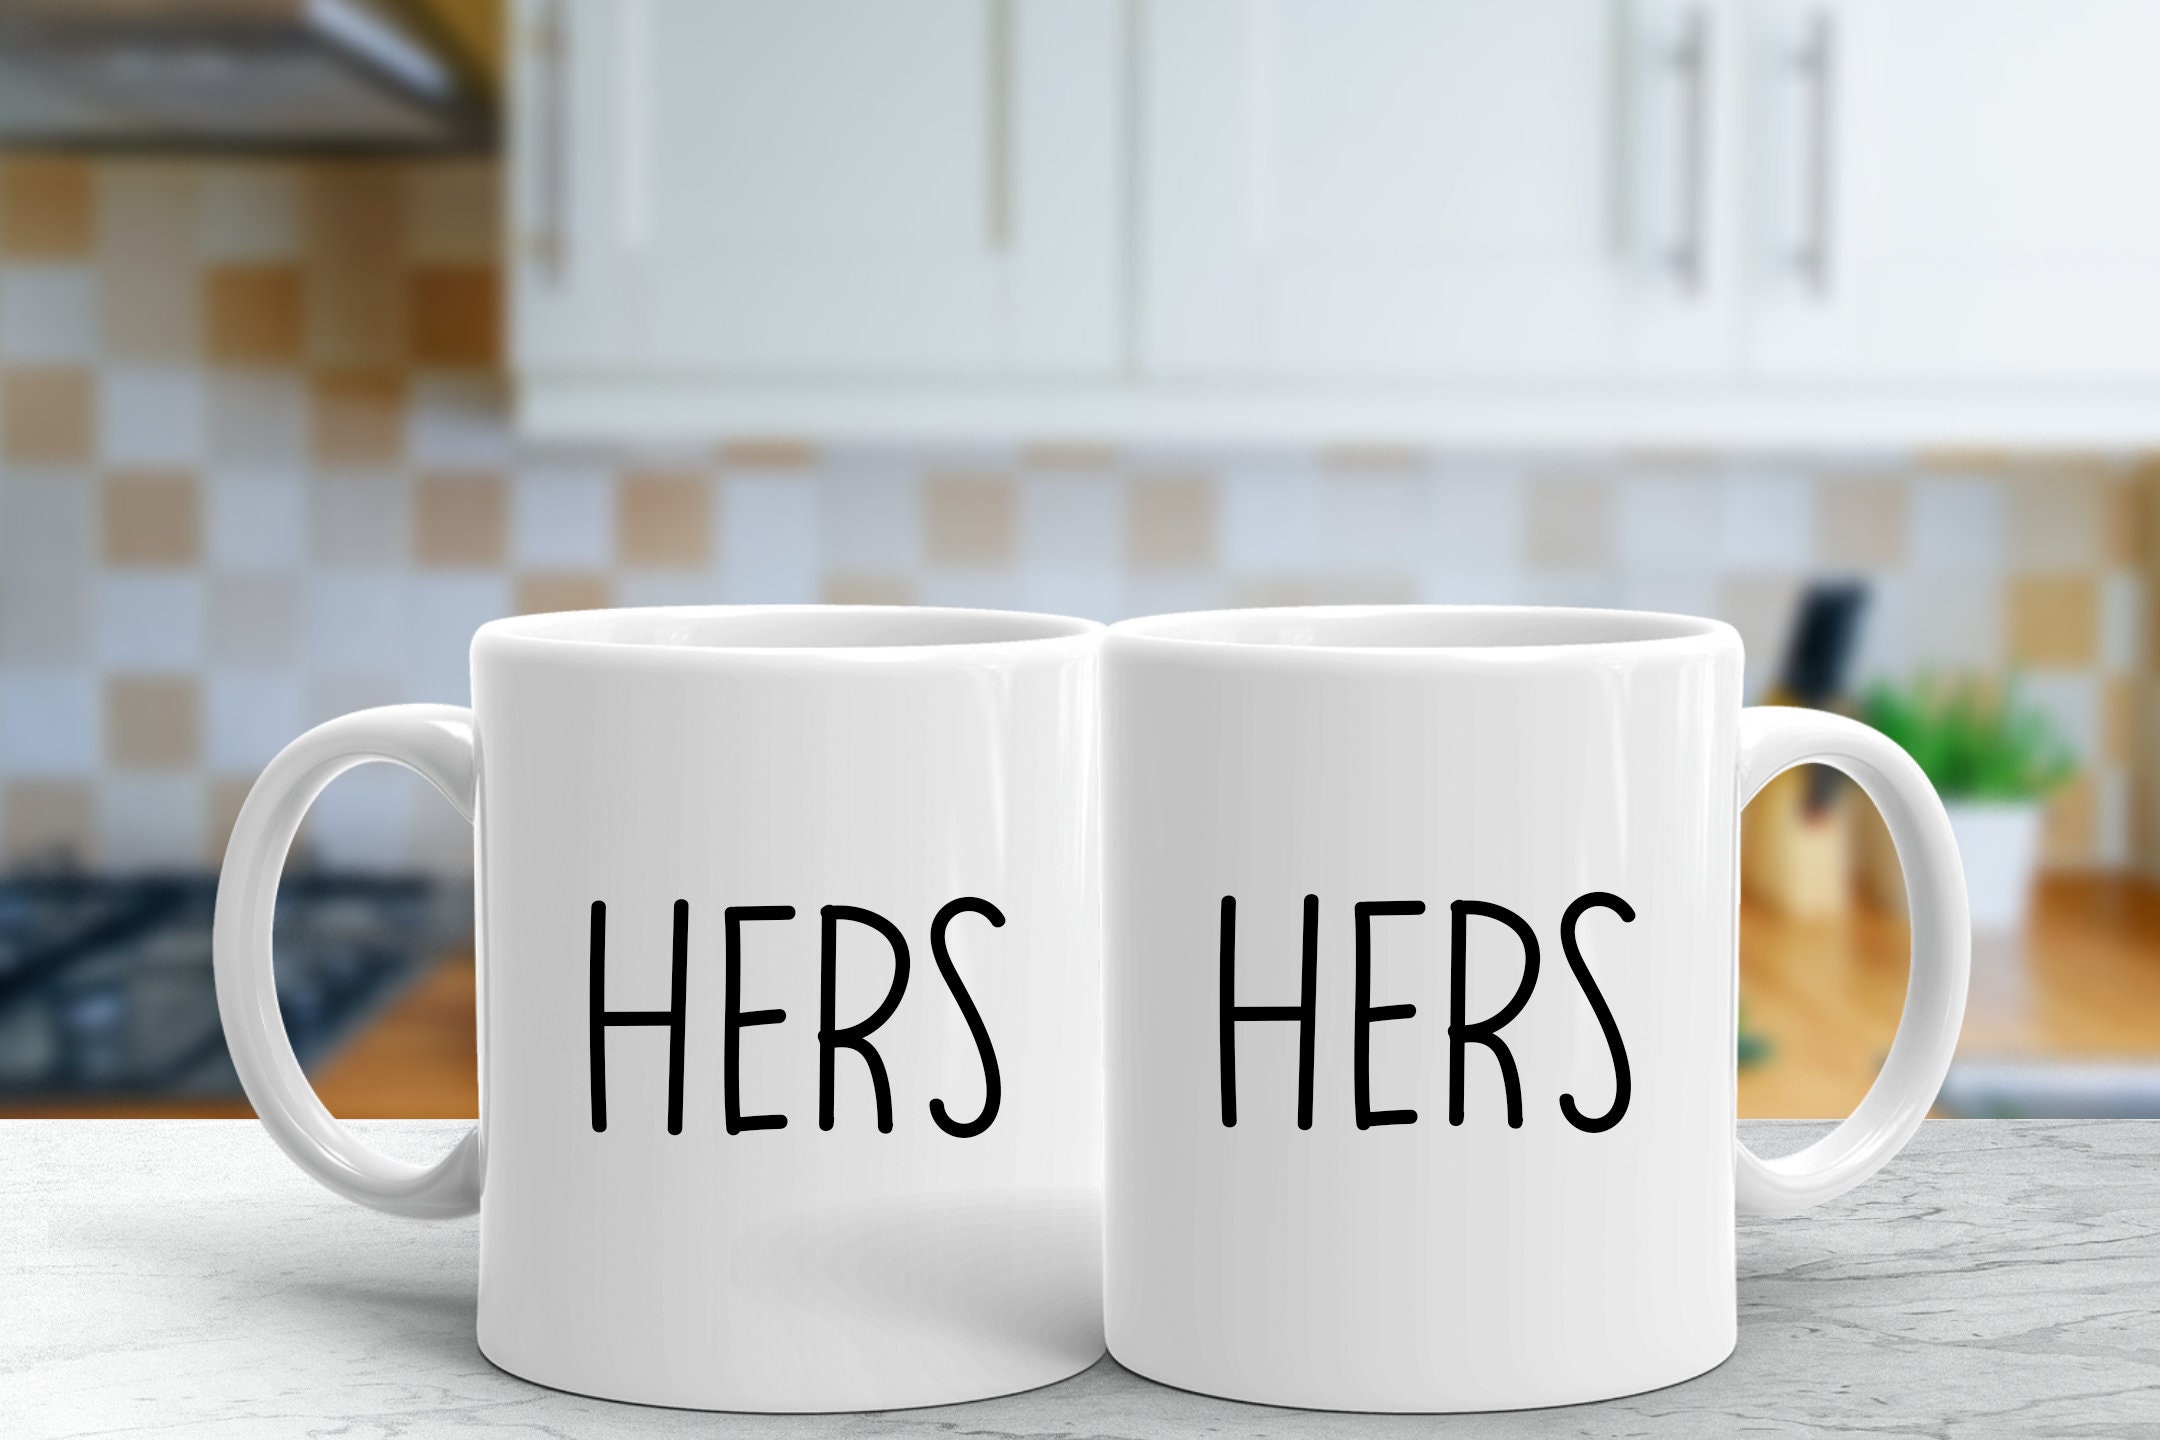 Hers and Hers Matching Mug Set Hers and Hers Gifts Lesbian